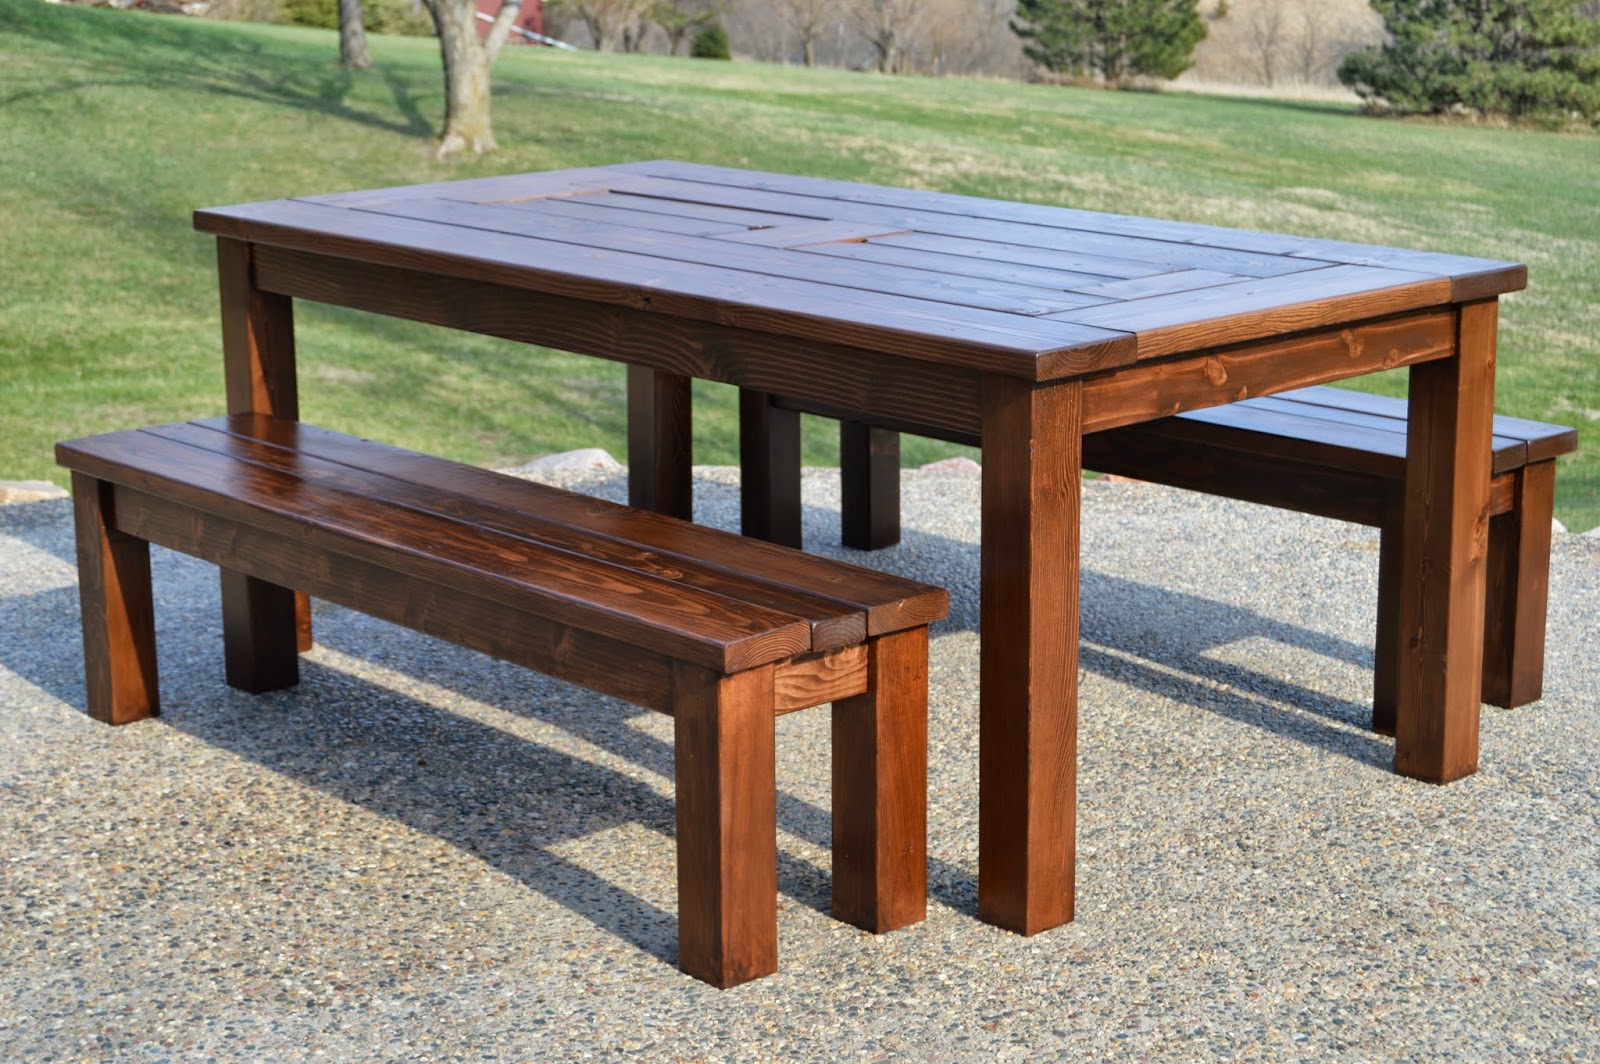 Building Plans Outdoor Table